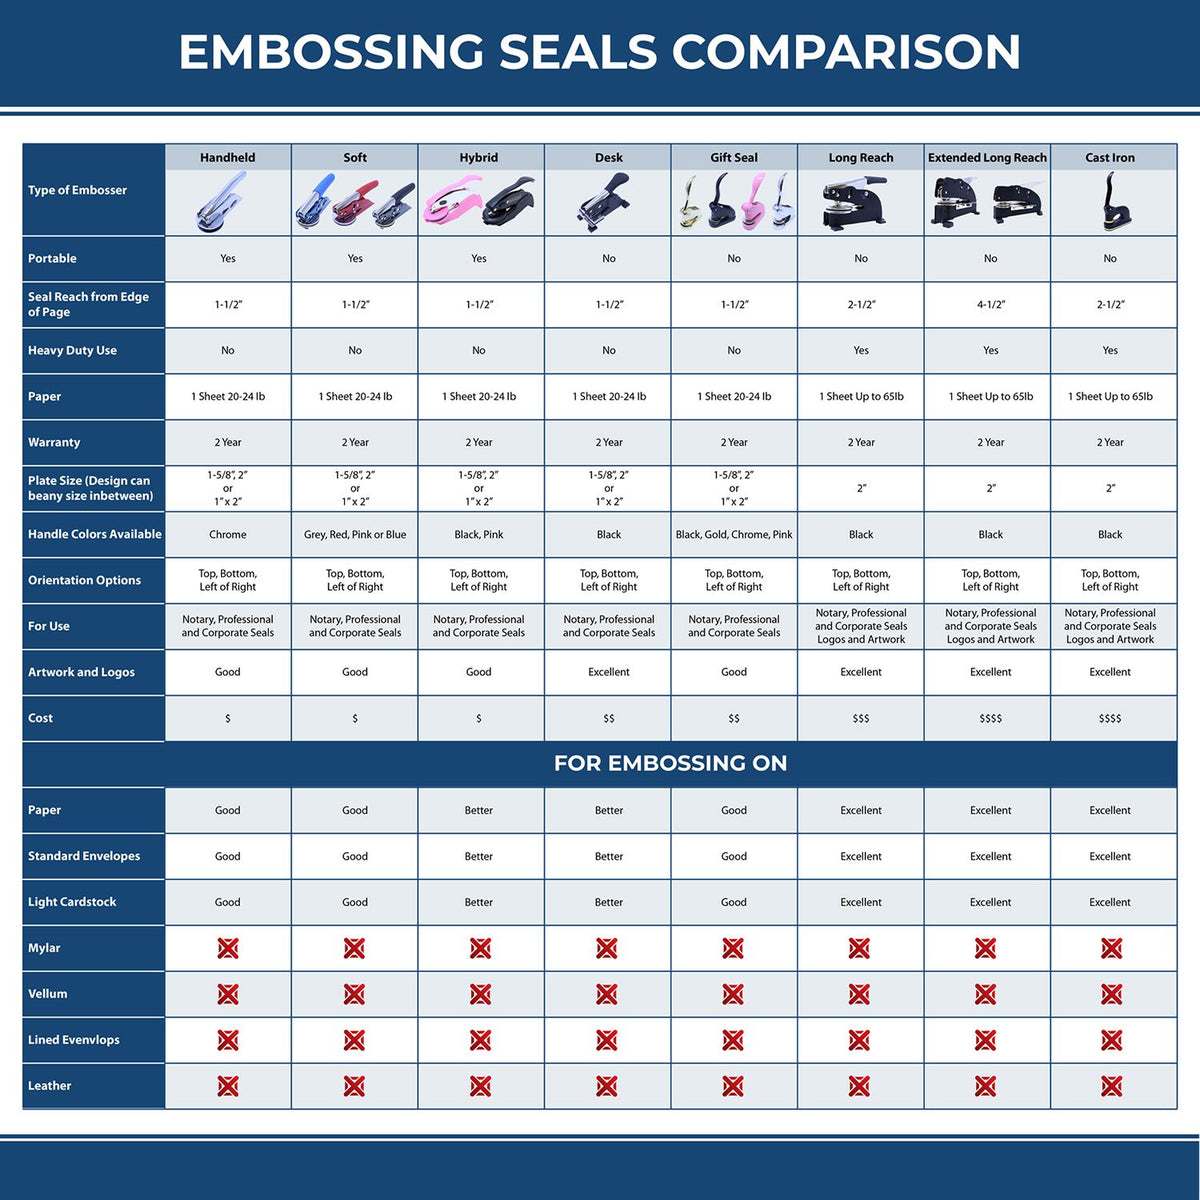 A comparison chart for the different types of mount models available for the Gift Mississippi Land Surveyor Seal